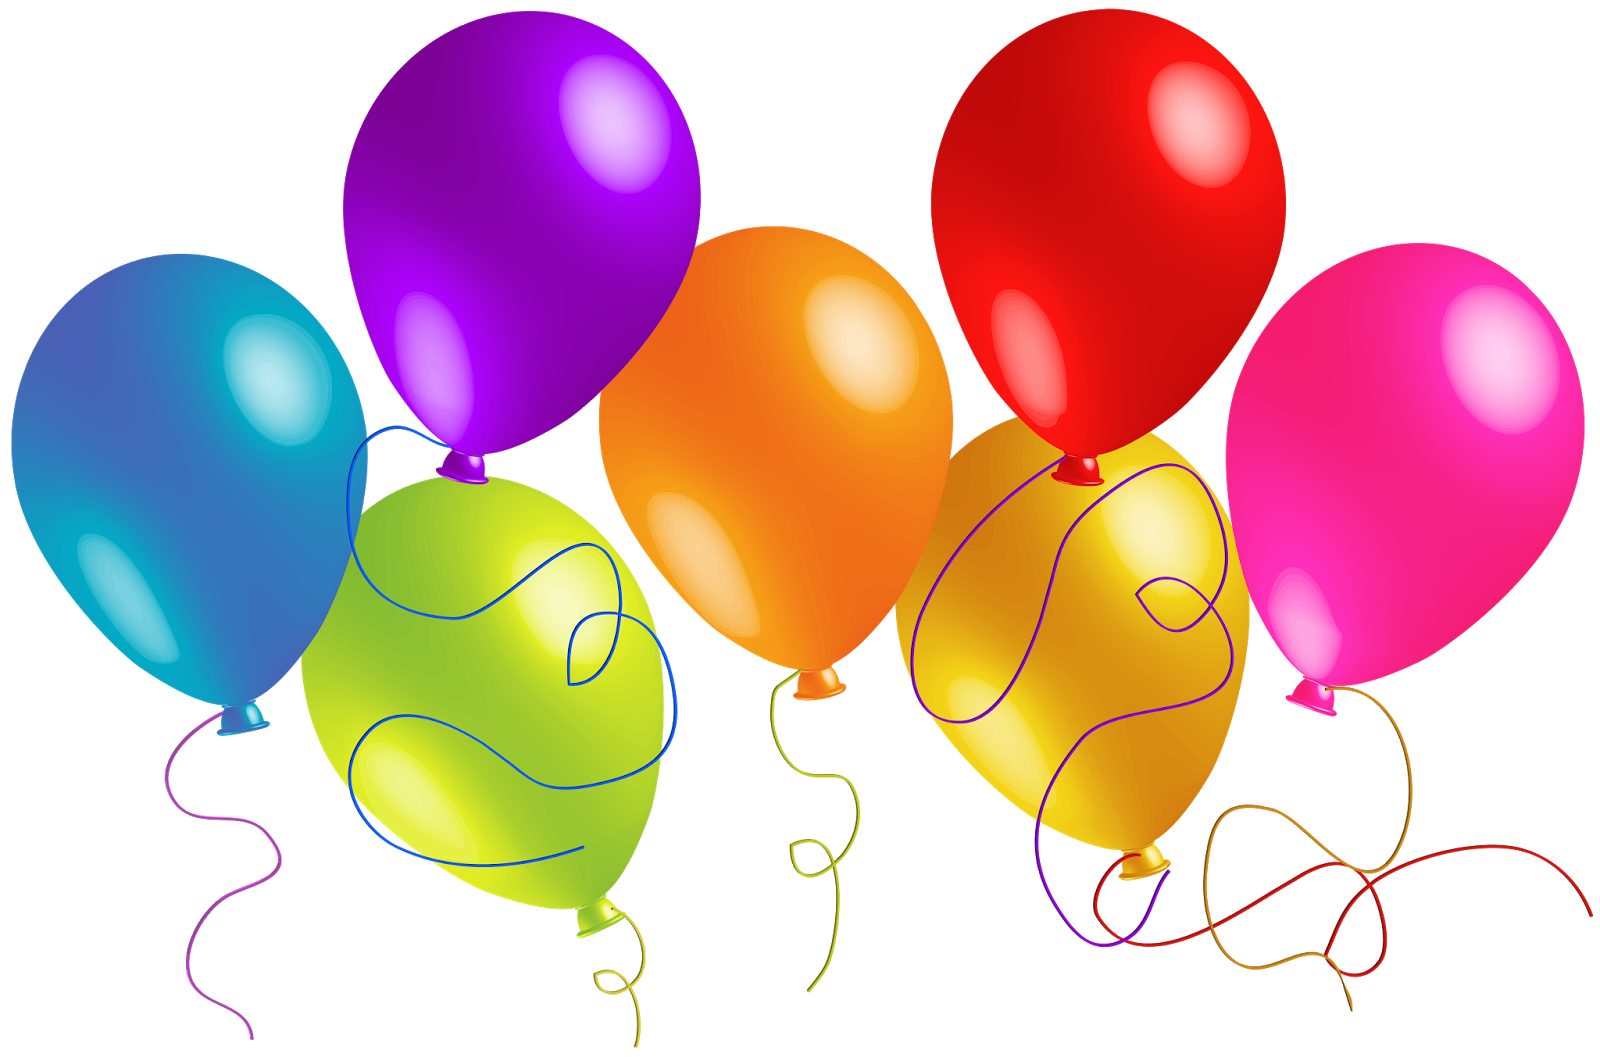 Anniversary clipart balloon. Free large images clip